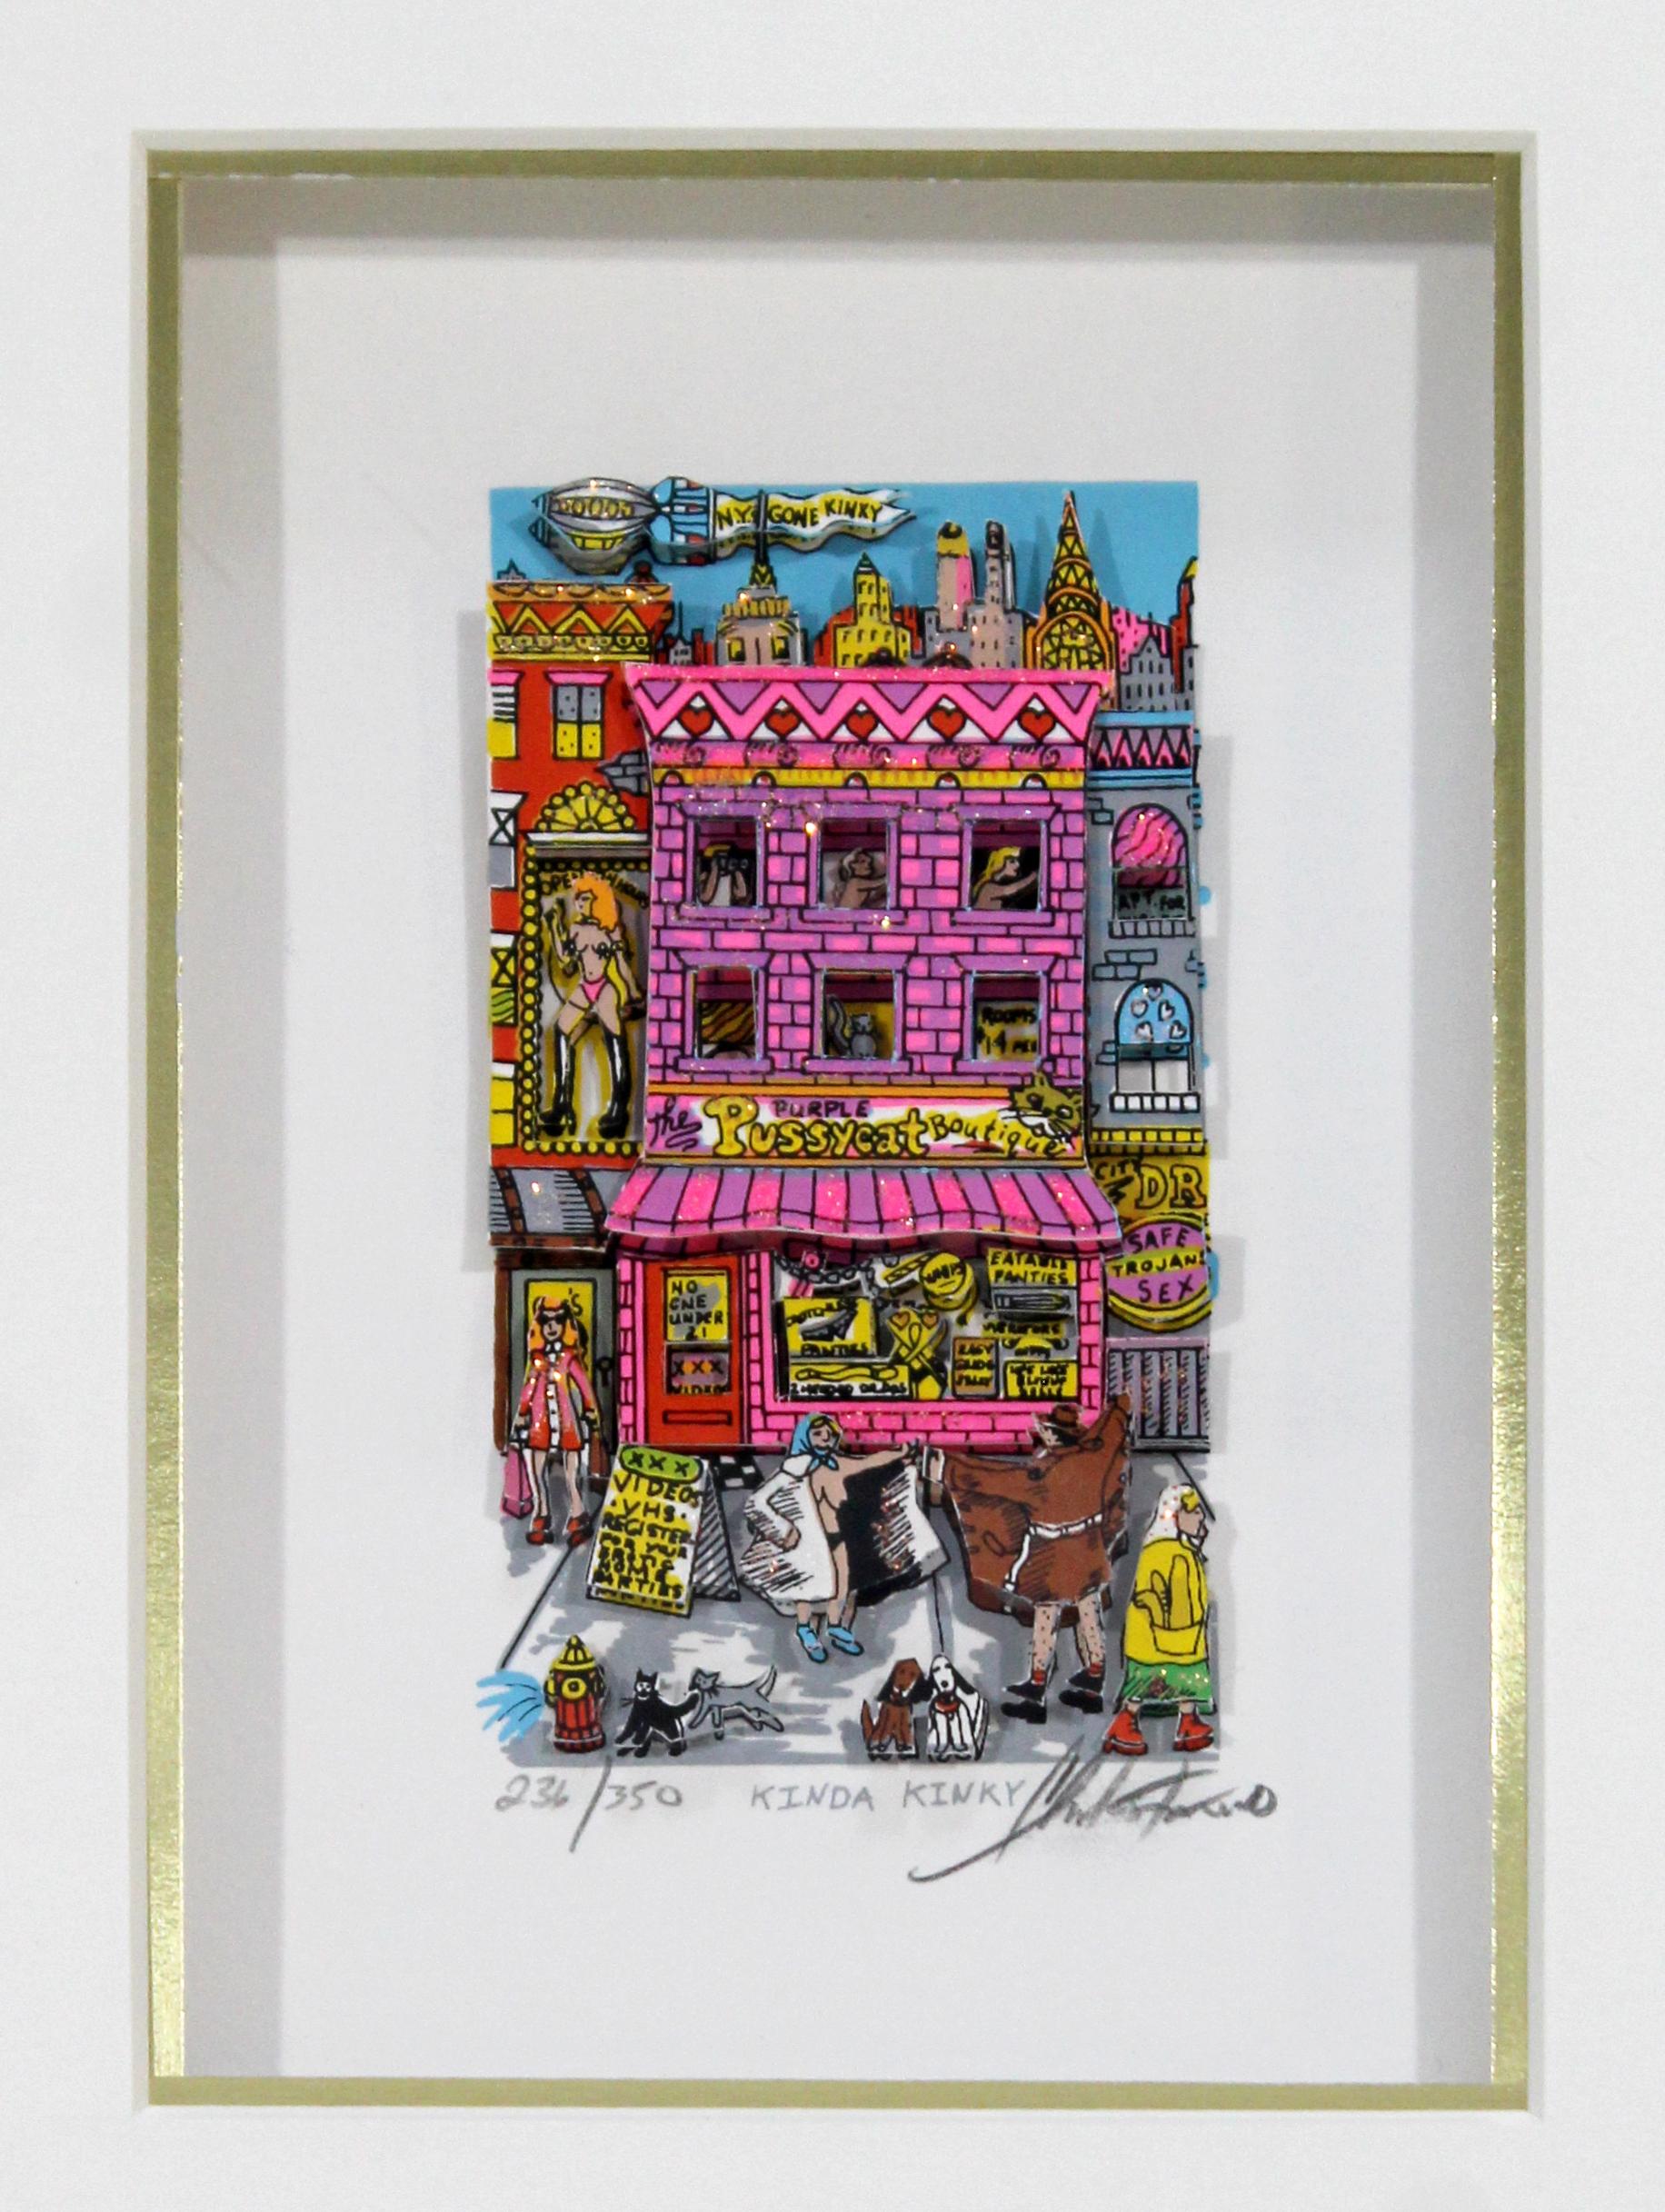 For your consideration is a fabulous, framed, mini 3D serigraph of Charles Fazzino's 